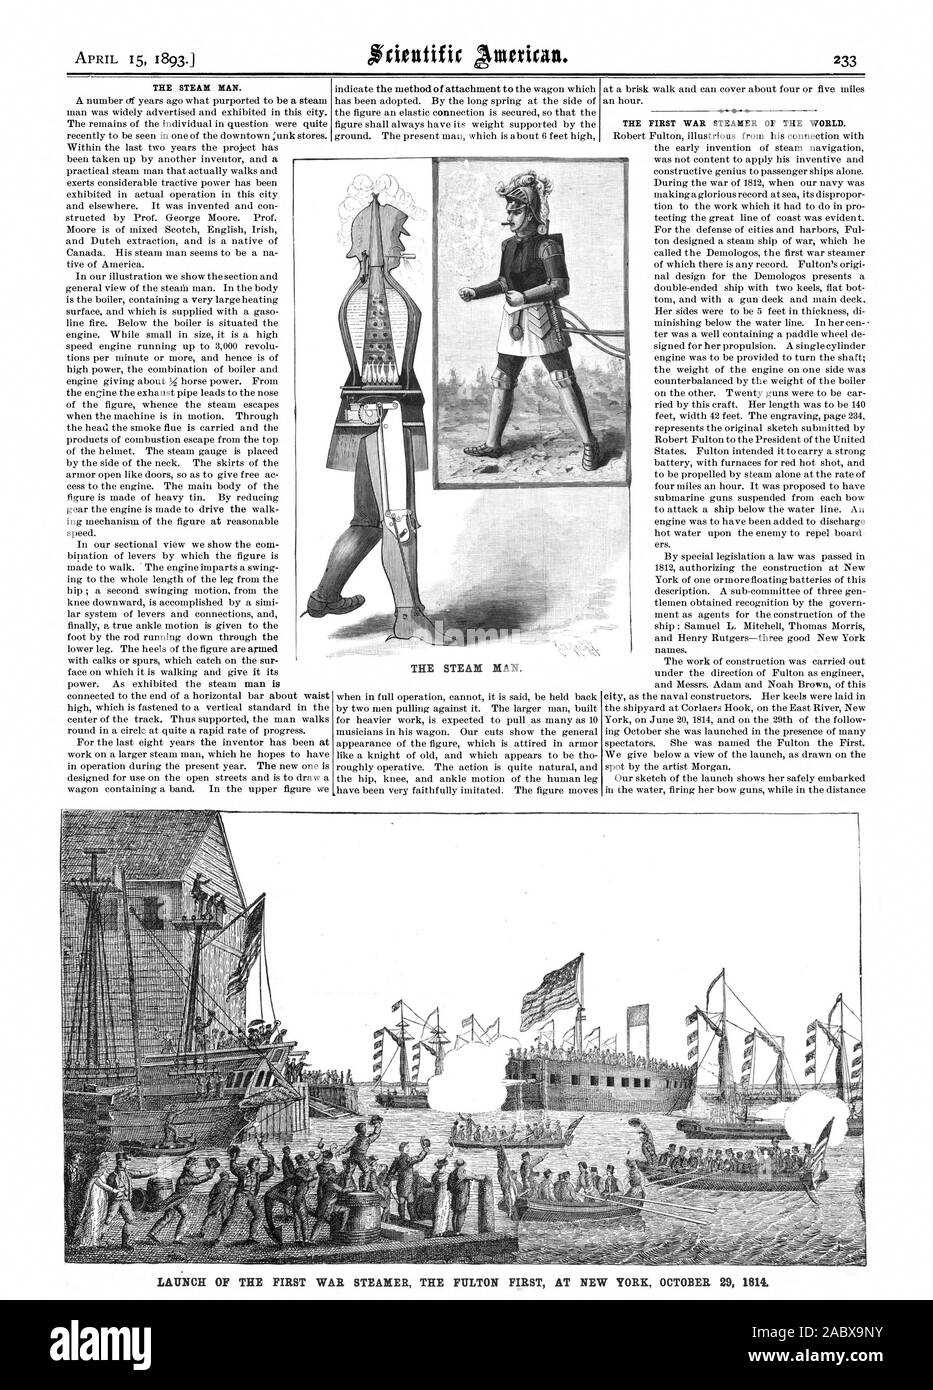 THE STEAM MAN. THE FIRST WAR STEAMER OF THE WORLD. THE STEAM MAN. LAUNCH OF THE FIRST WAR STEAMER THE FULTON FIRST AT NEW YORK OCTOBER 29 1814., scientific american, 1893-04-15 Stock Photo